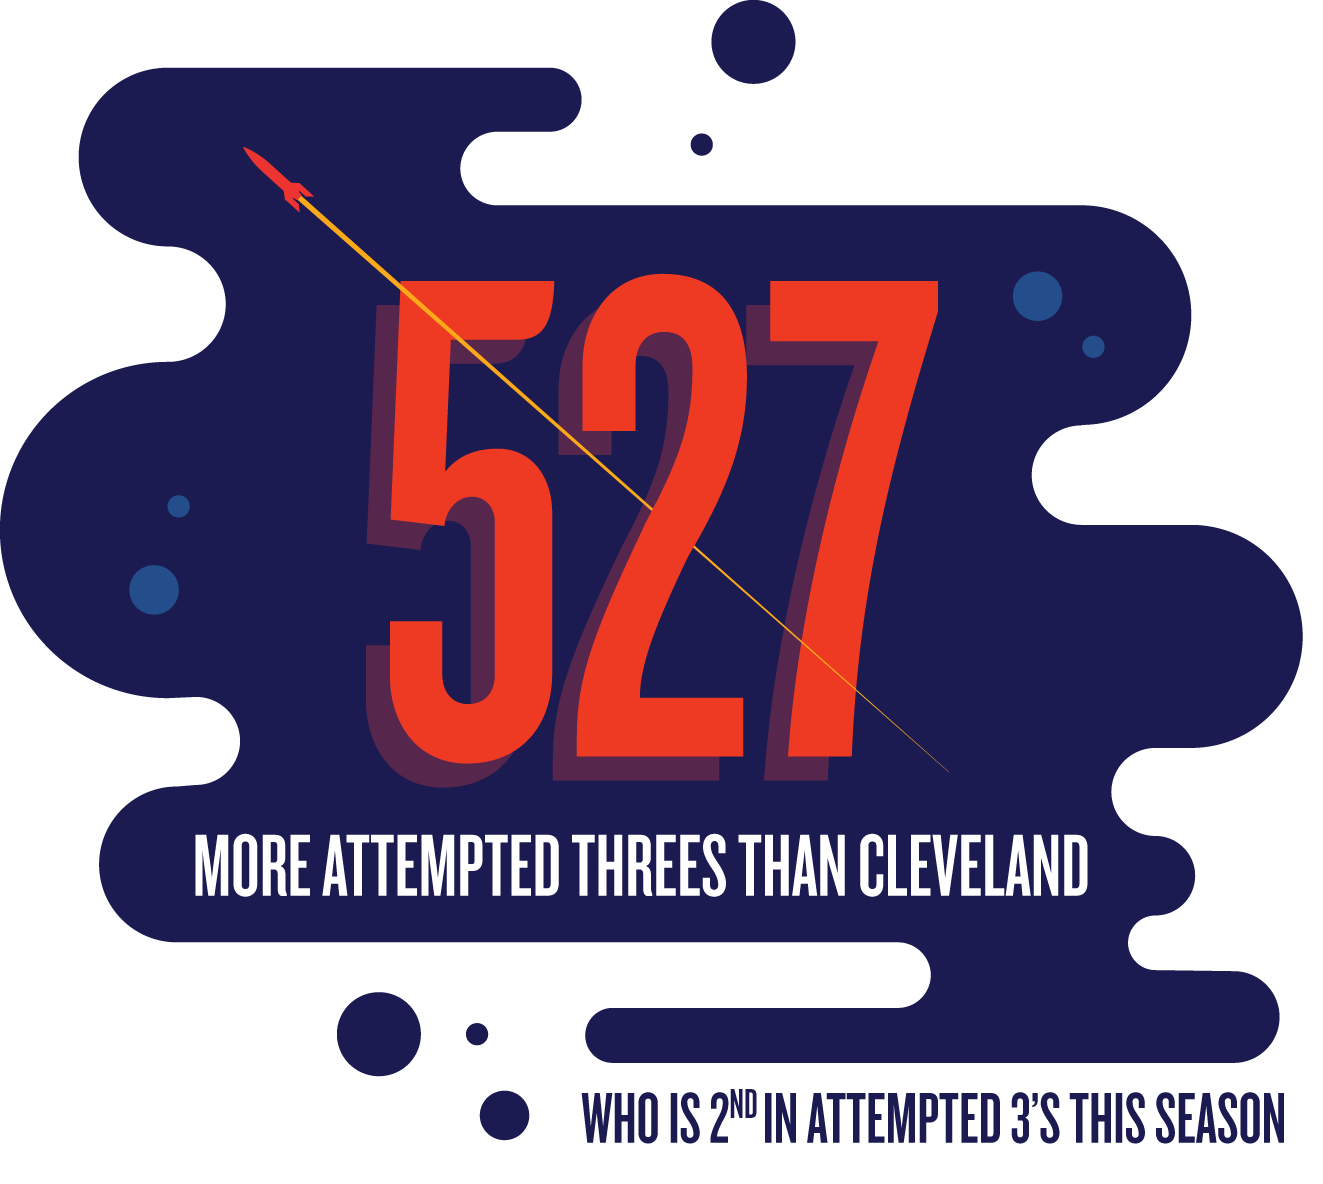 500 more threes than Cleveland, who've made the second-most threes this season